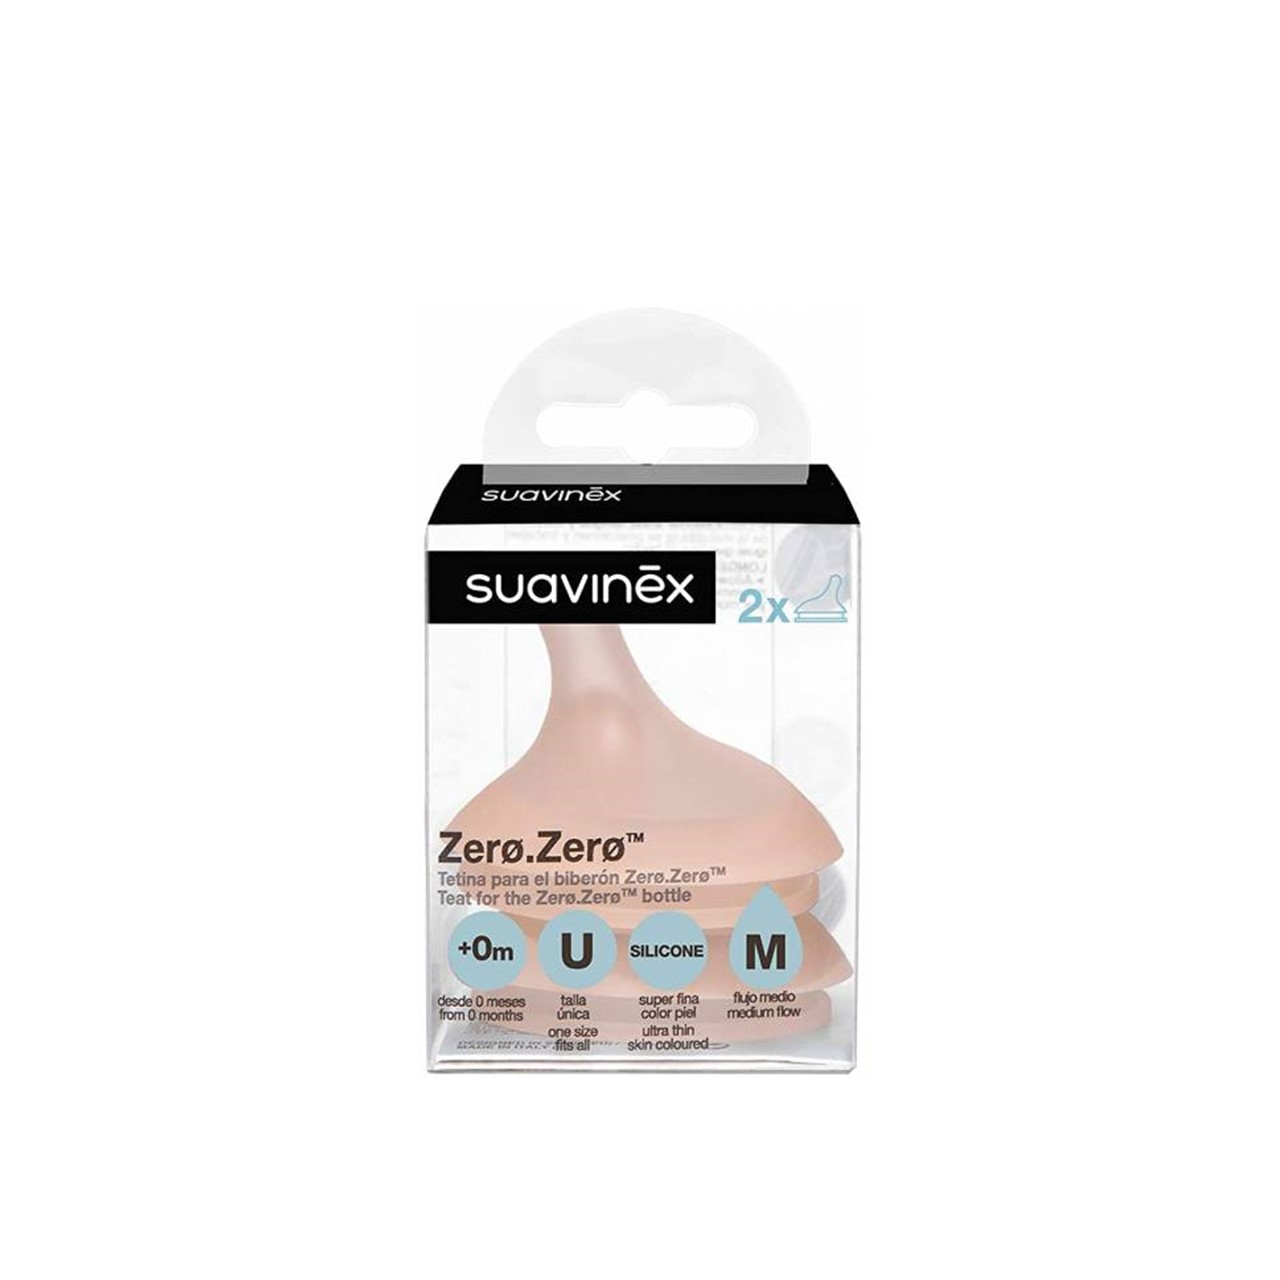 Suavinex, Zerø.Zerø Bottle Pack Medium Flow Rate Anti-Colic 270ml with  Pacifier, Replacement Silicone Bag : : Baby Products